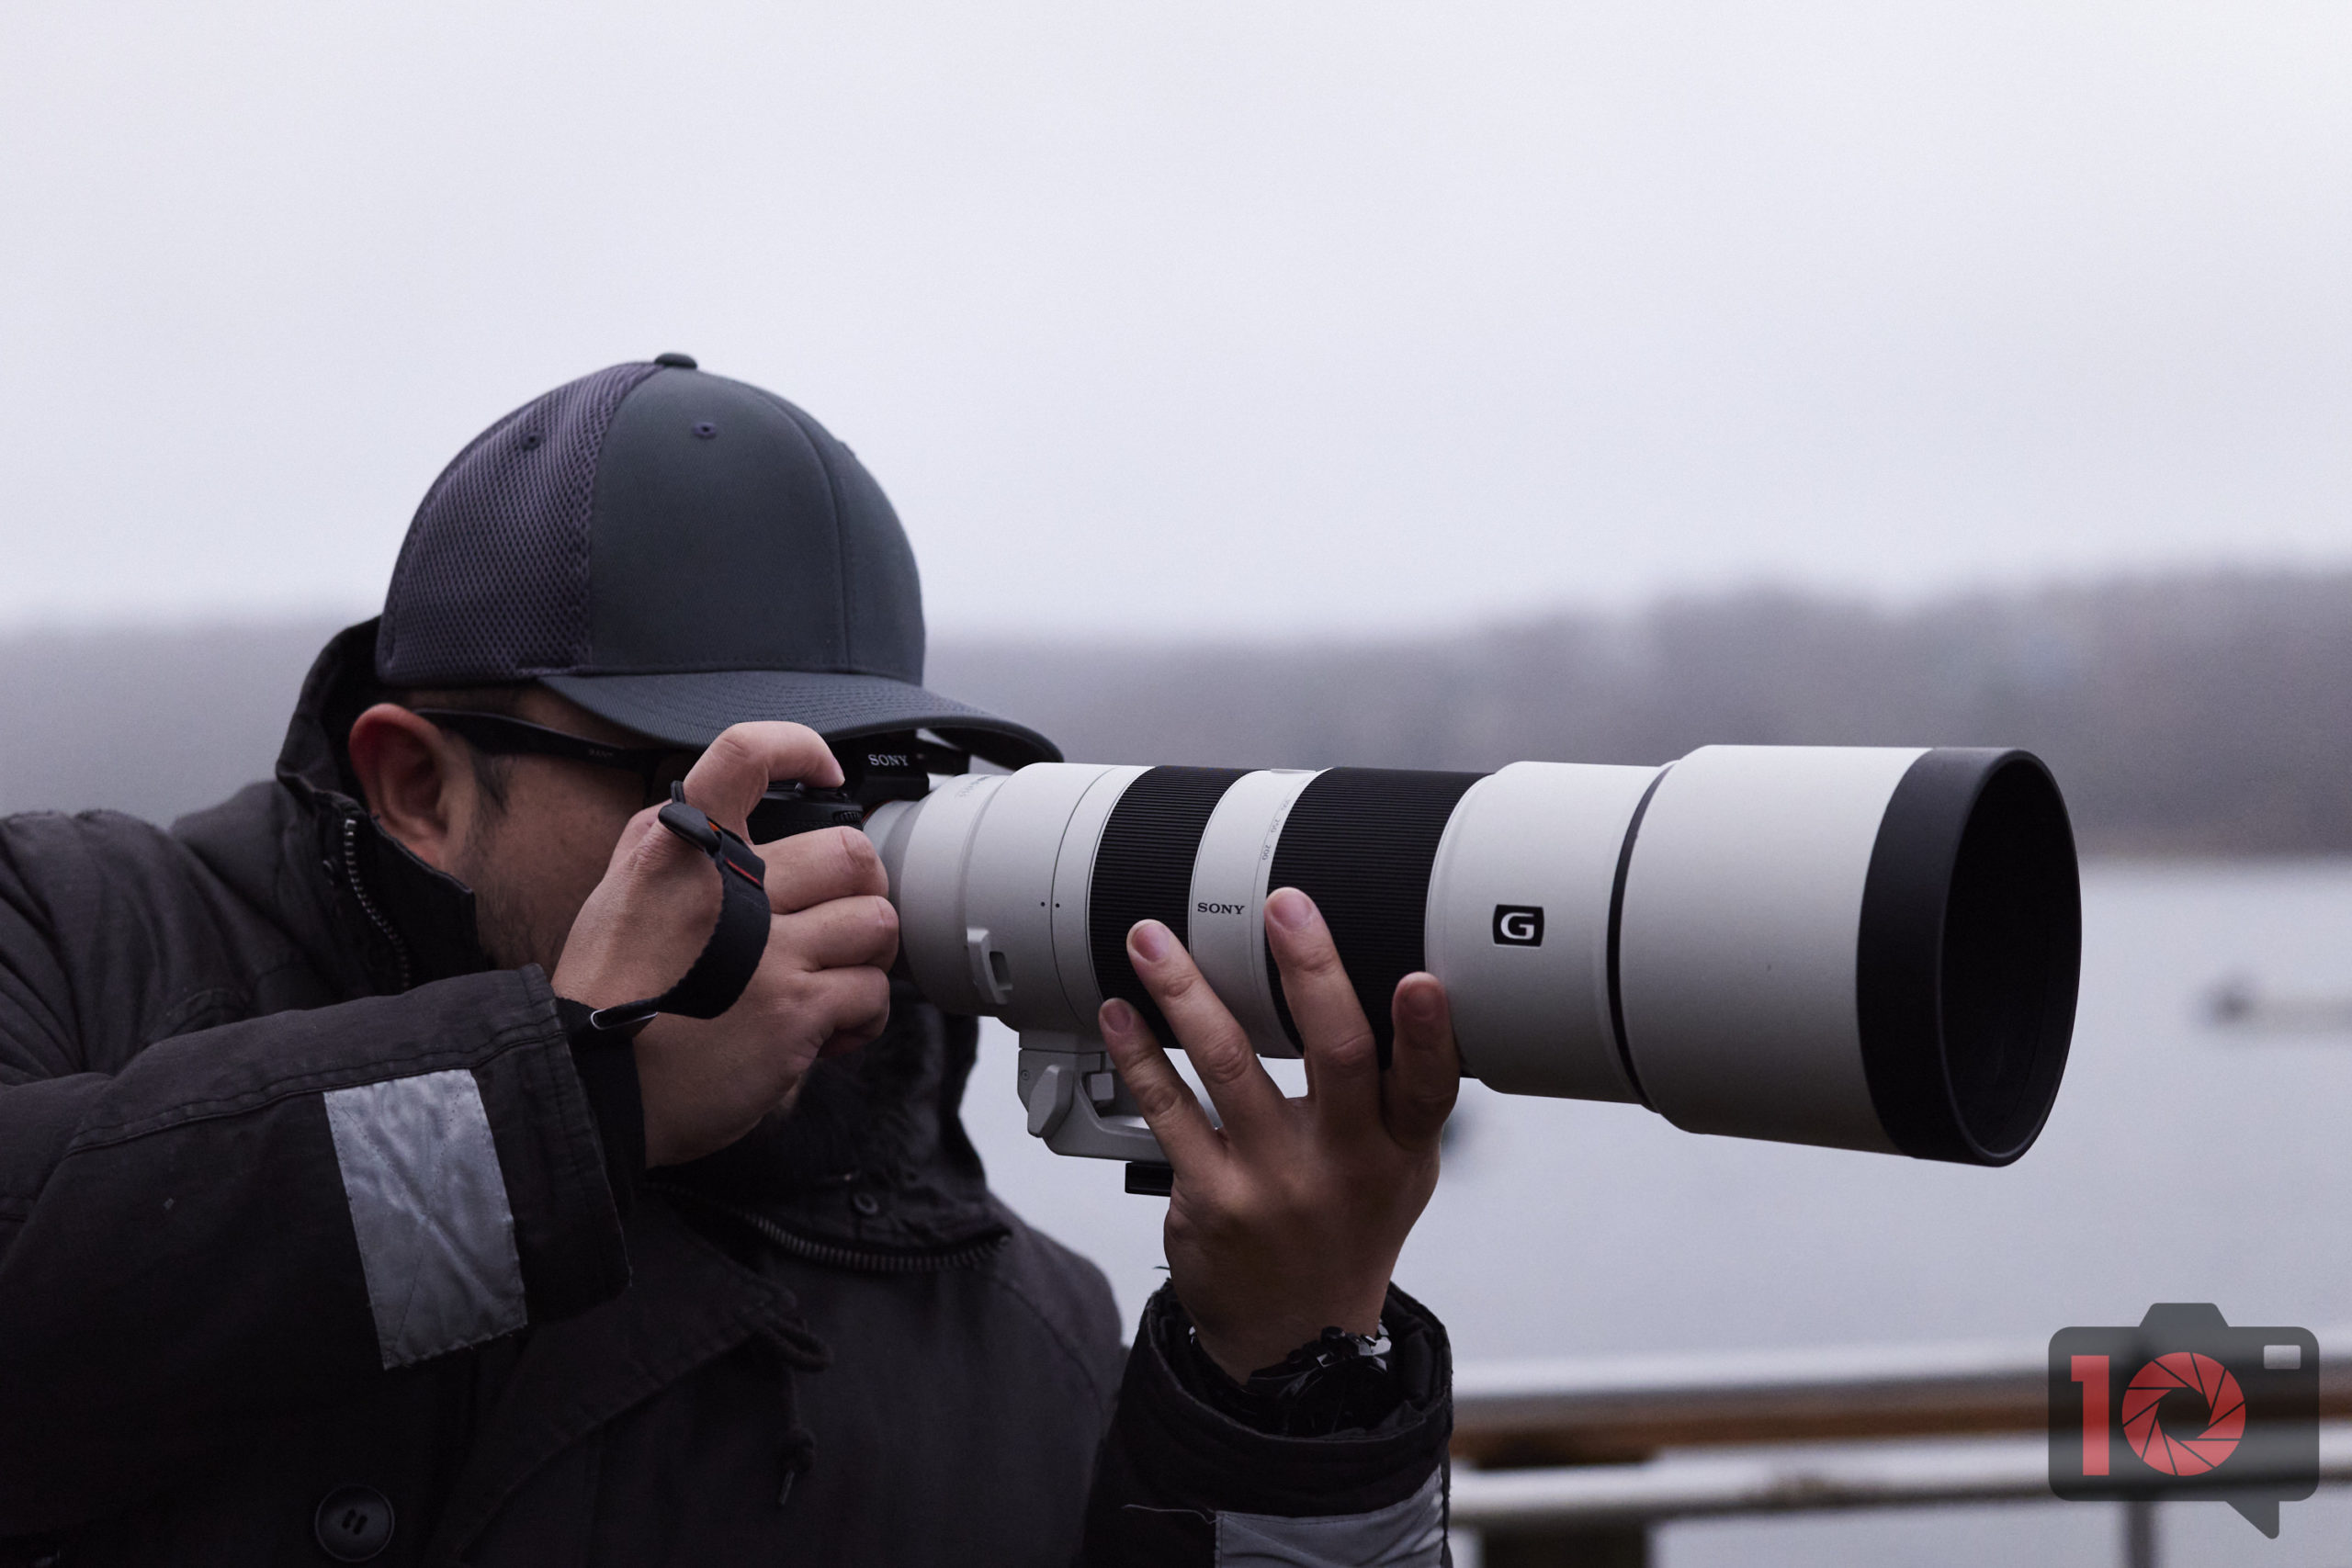 Sony A7RV and FE 200-600 F5.6-6.3 G OSS Lens Review - For the